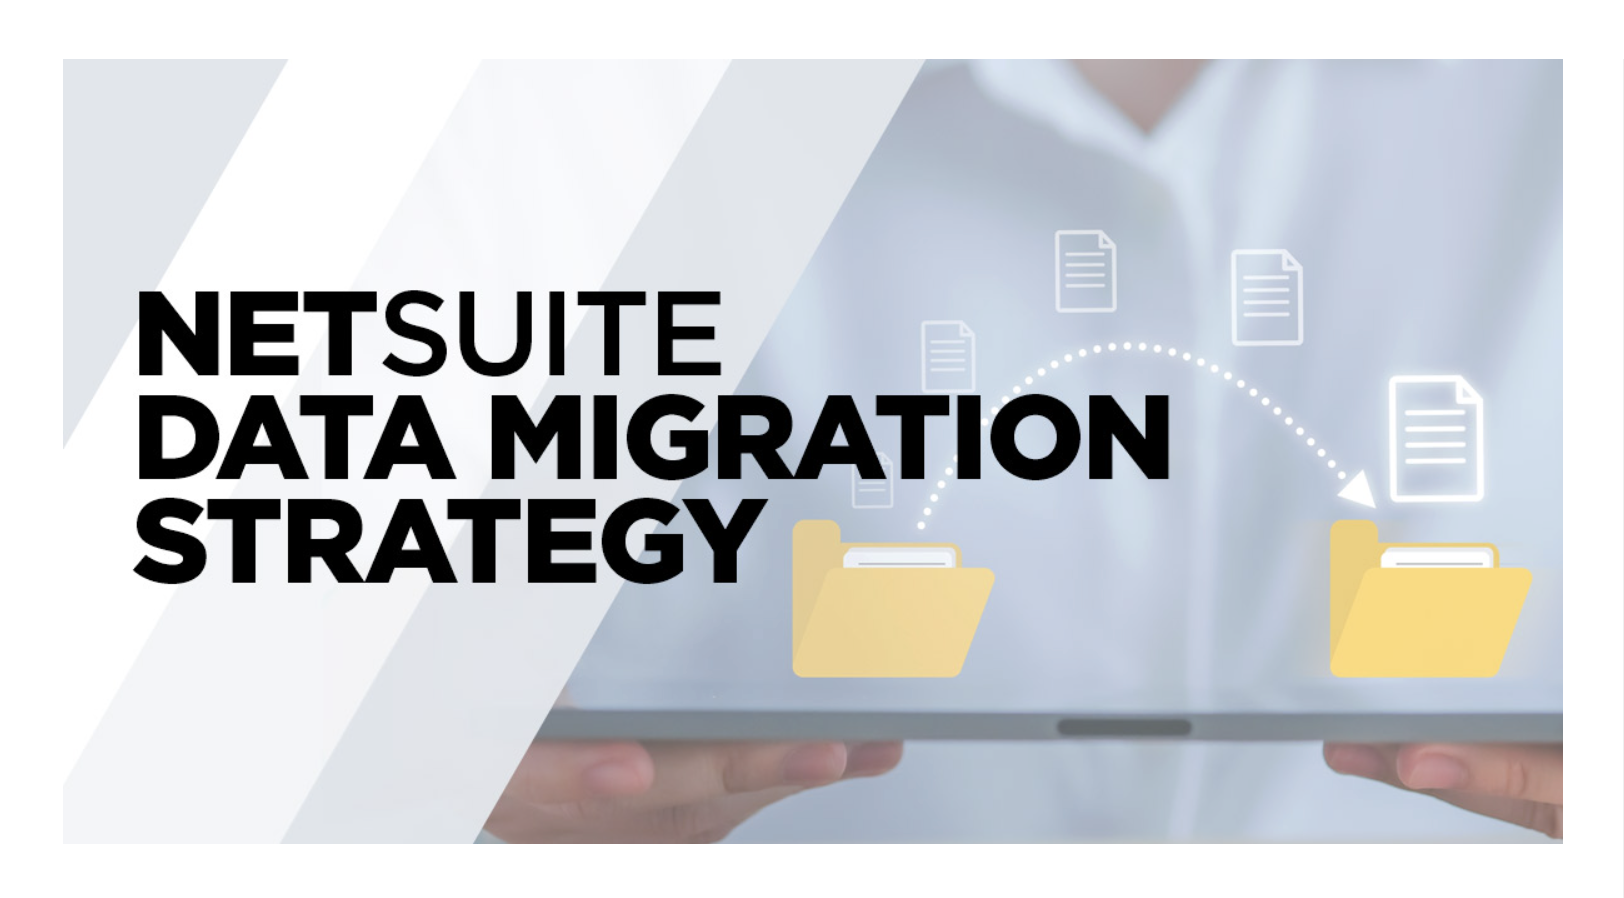 Transform Your Business with Netbook Data Migration